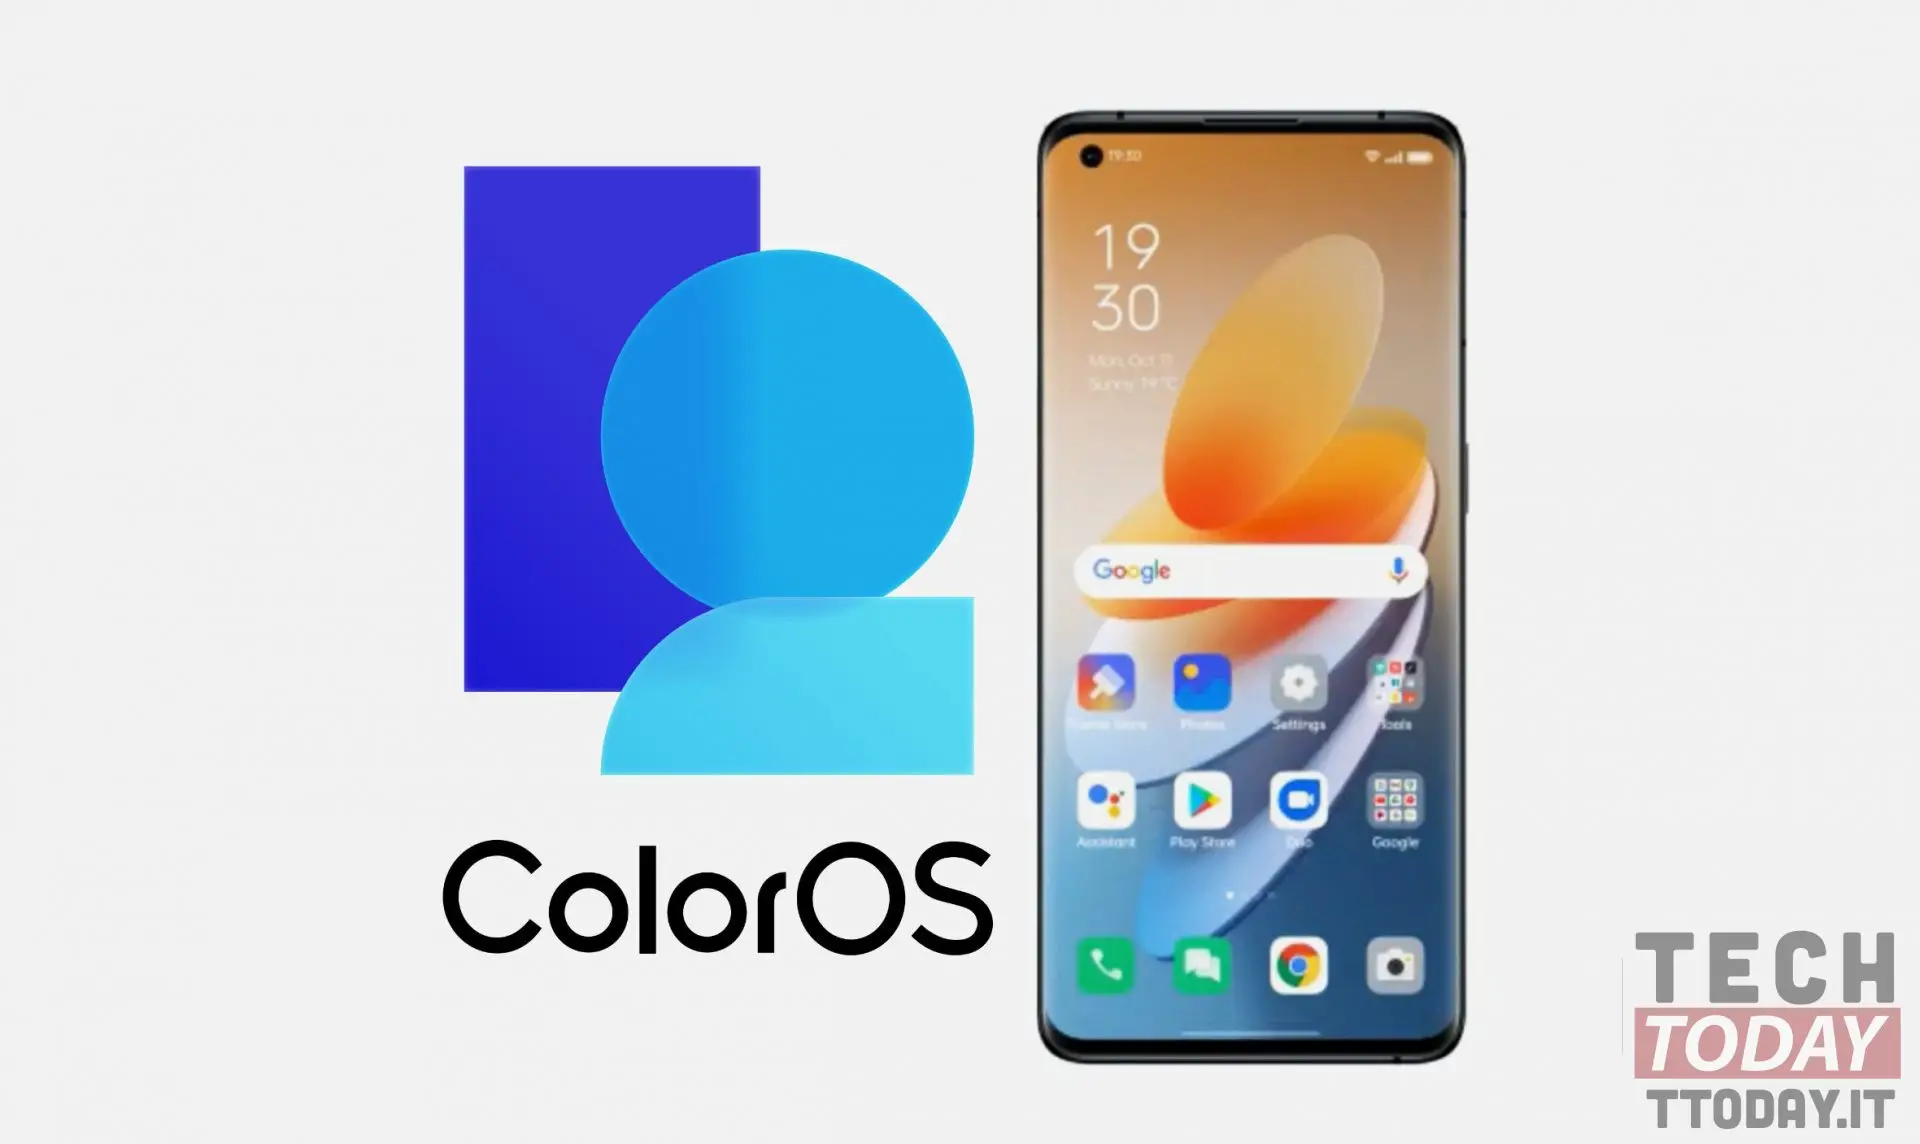 coloros 12 official: dates and official list of smartphones that will be updated